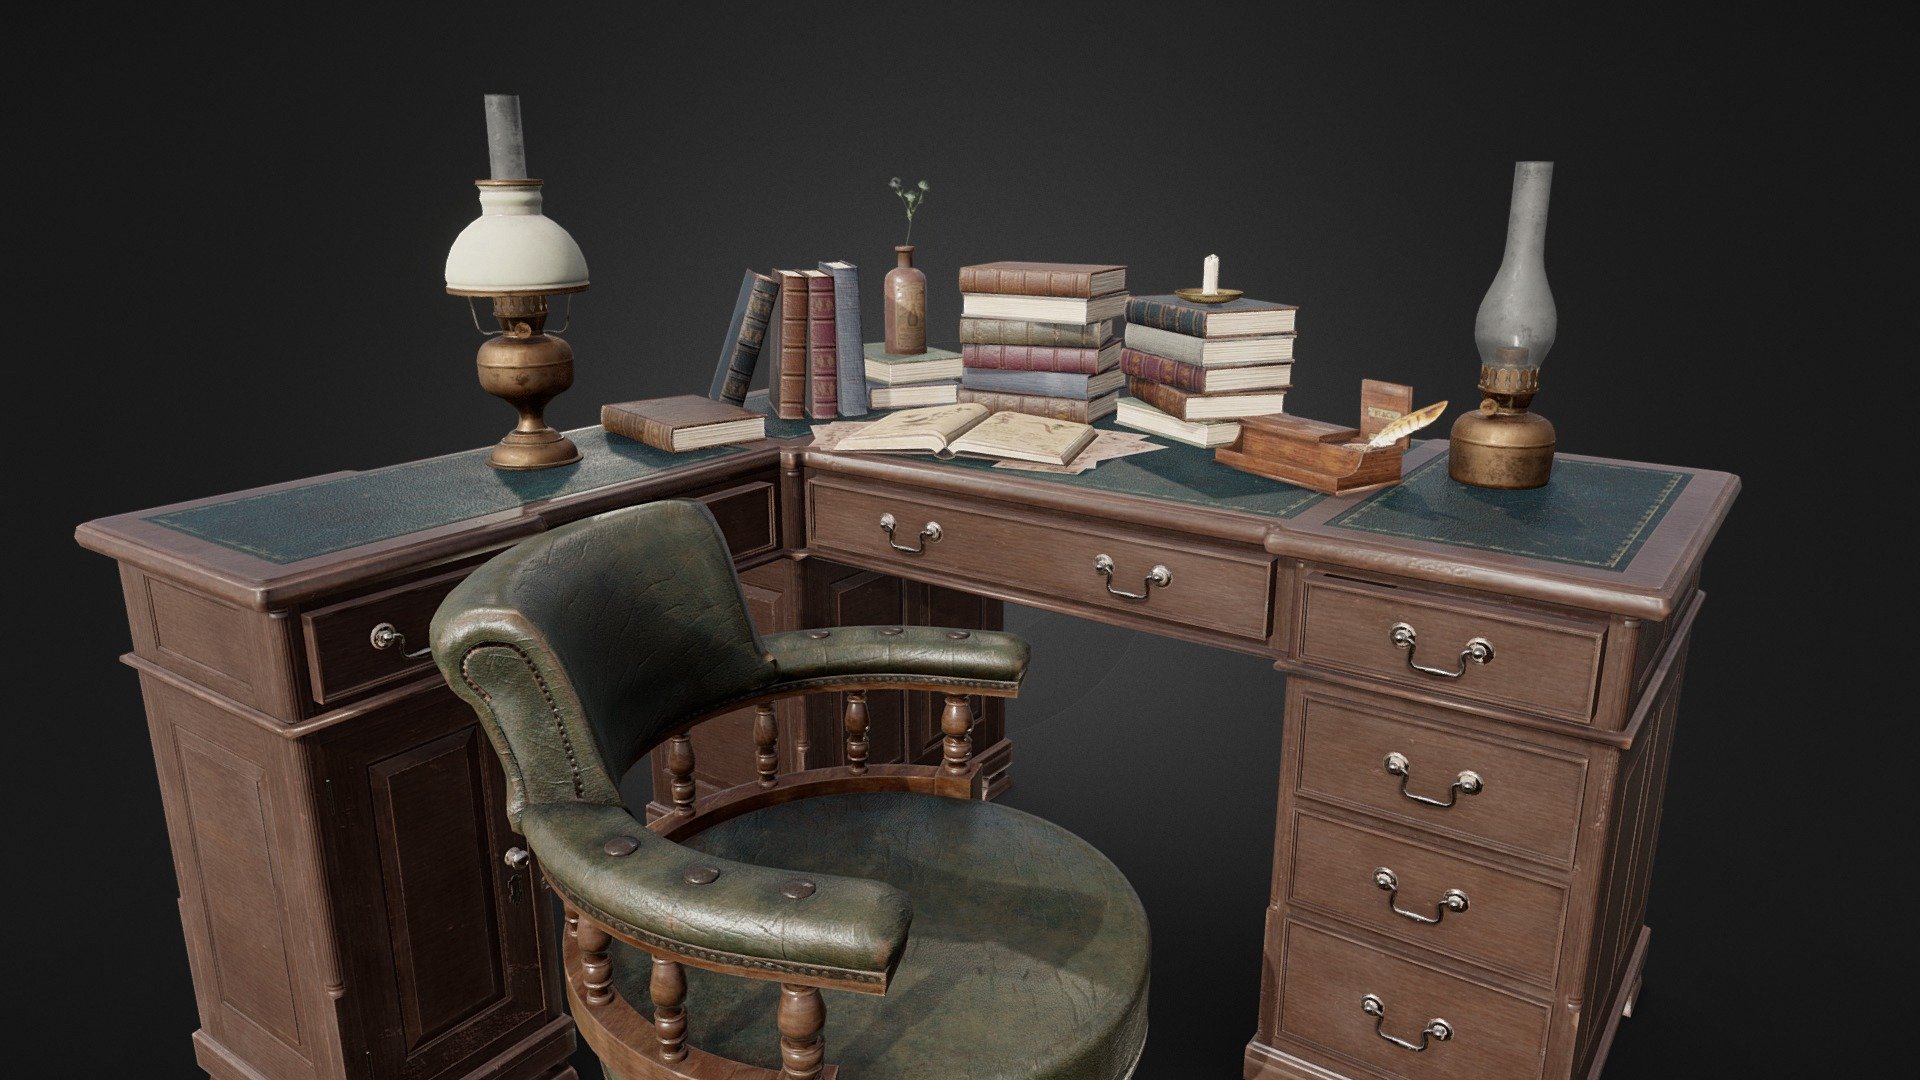 A game-ready desk with props. It would make a great addition to an office or library scene and the props could be used more broadely in any old / Victorian-era environment. Includes:


Desk. The corner extension can be removed. The cabinet and top draws can be opened 2k texture
Leather chair 2k texture
Collection of books, including a candle, ink well and quill pen 2k texture
Oil lamps 1k texture
Small bottle with flower 512x512

Modelled in Blender and textured in Substance Painter 3d model